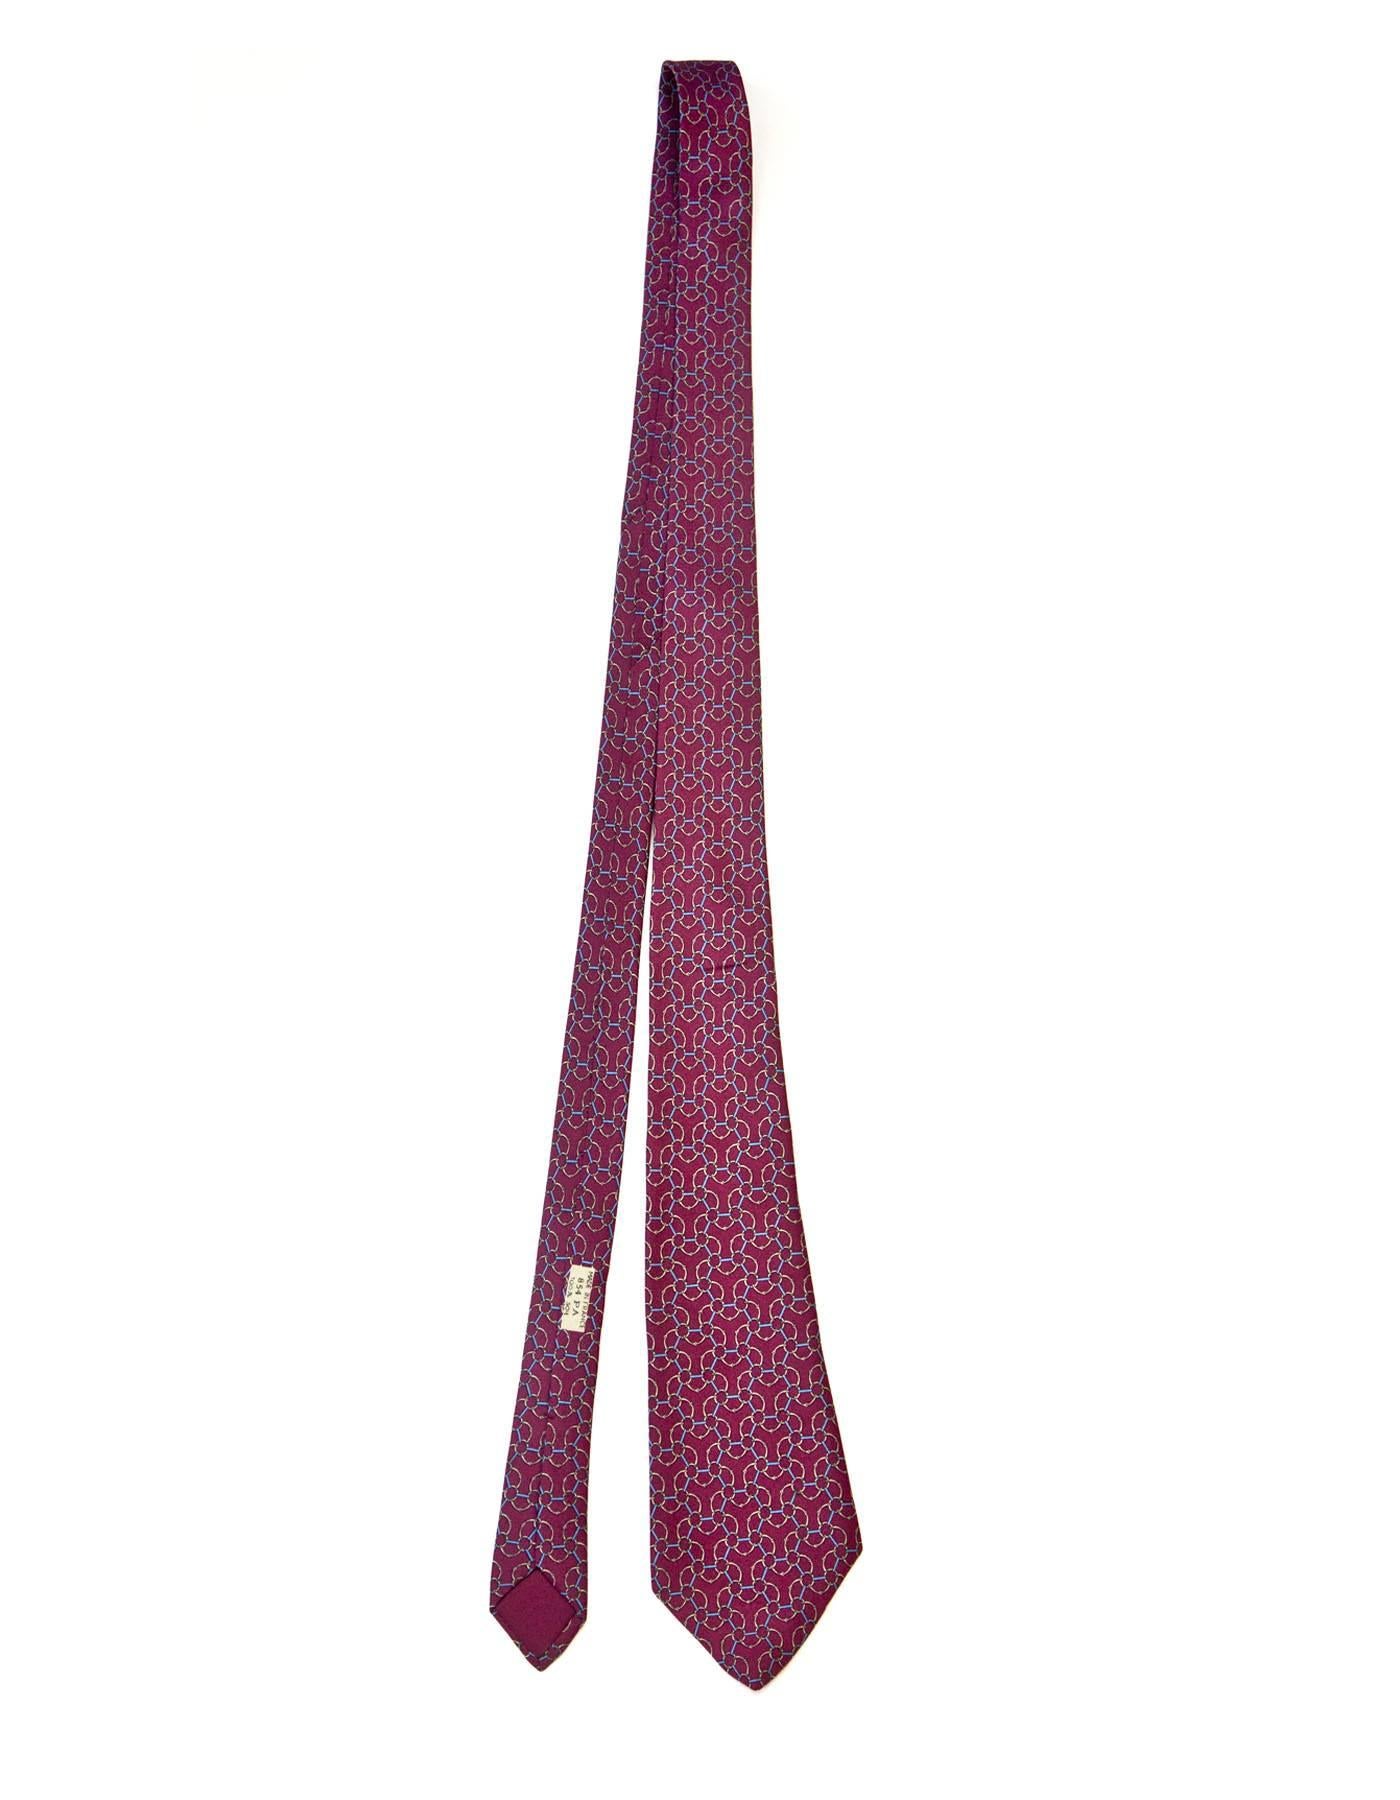 Hermes Burgundy & Blue Chain Print Silk Tie

Made In: France
Color: Burgundy and blue
Composition: 100% silk
Overall Condition: Excellent pre-owned condition

Measurements: 
Length: 58"
Width: 1.5"-3.5"